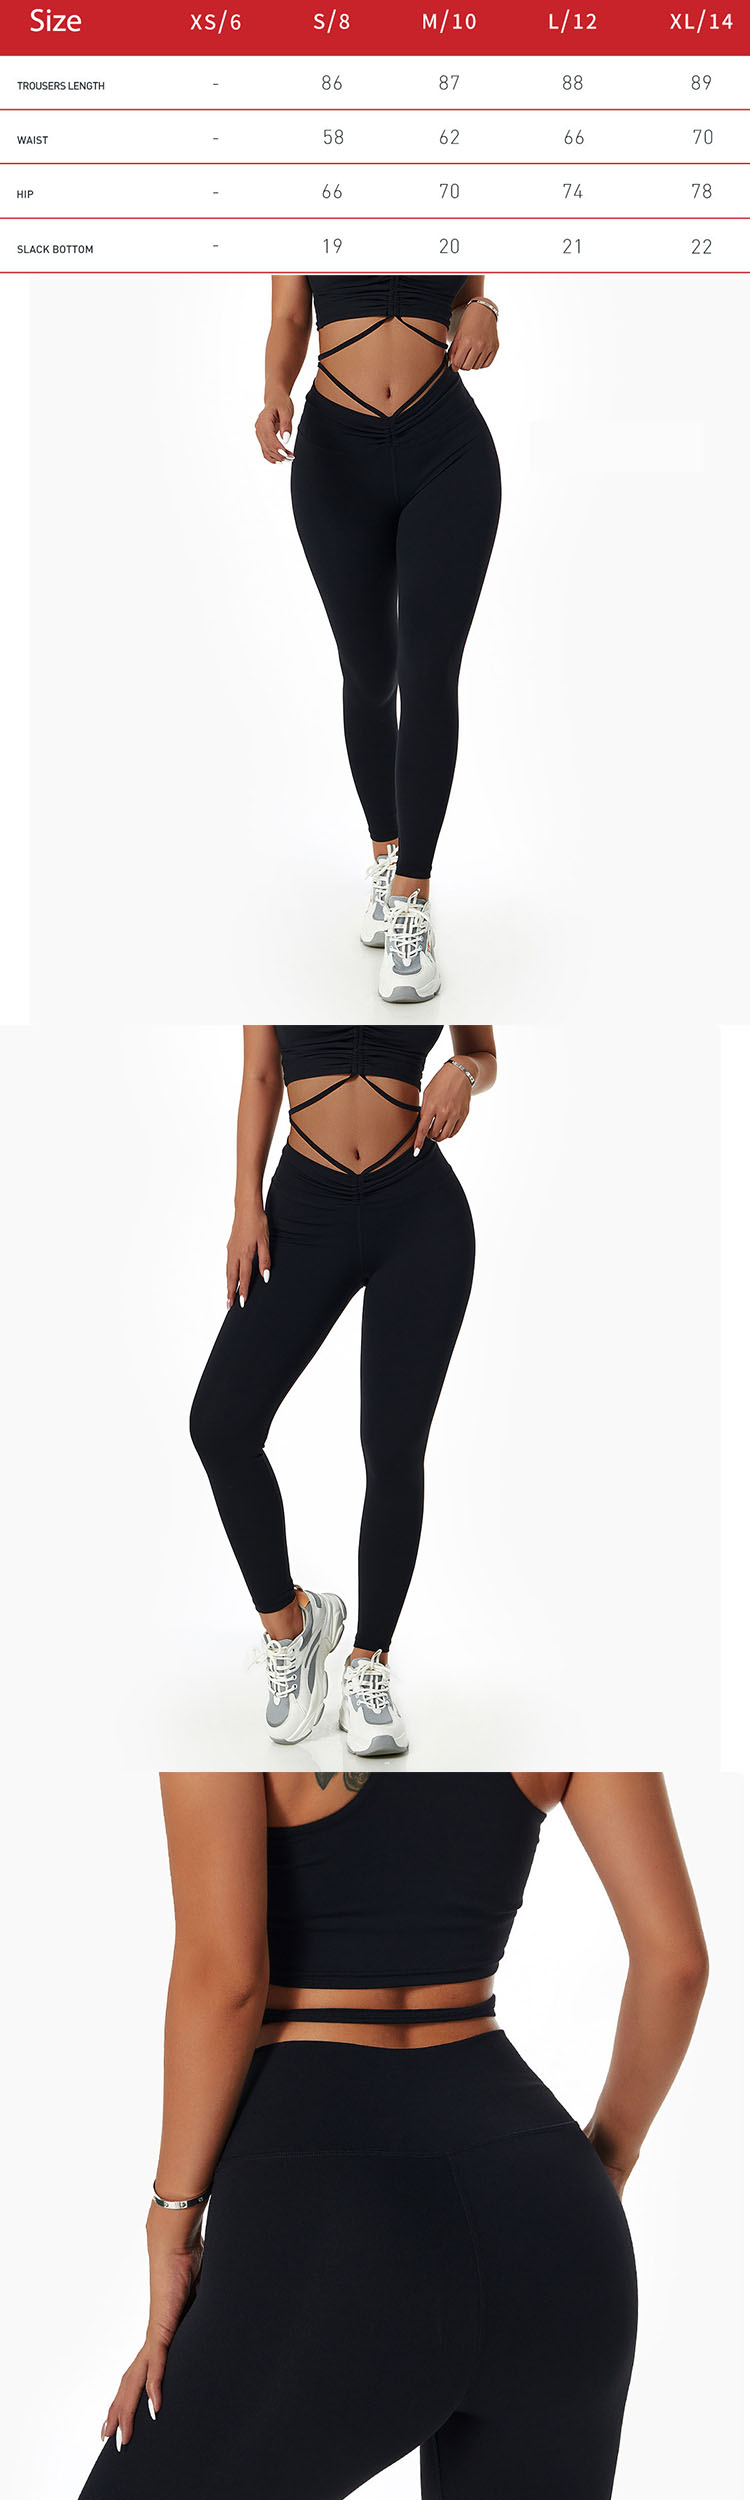 The way the structure is used is a top priority in the design of over the heel yoga leggings